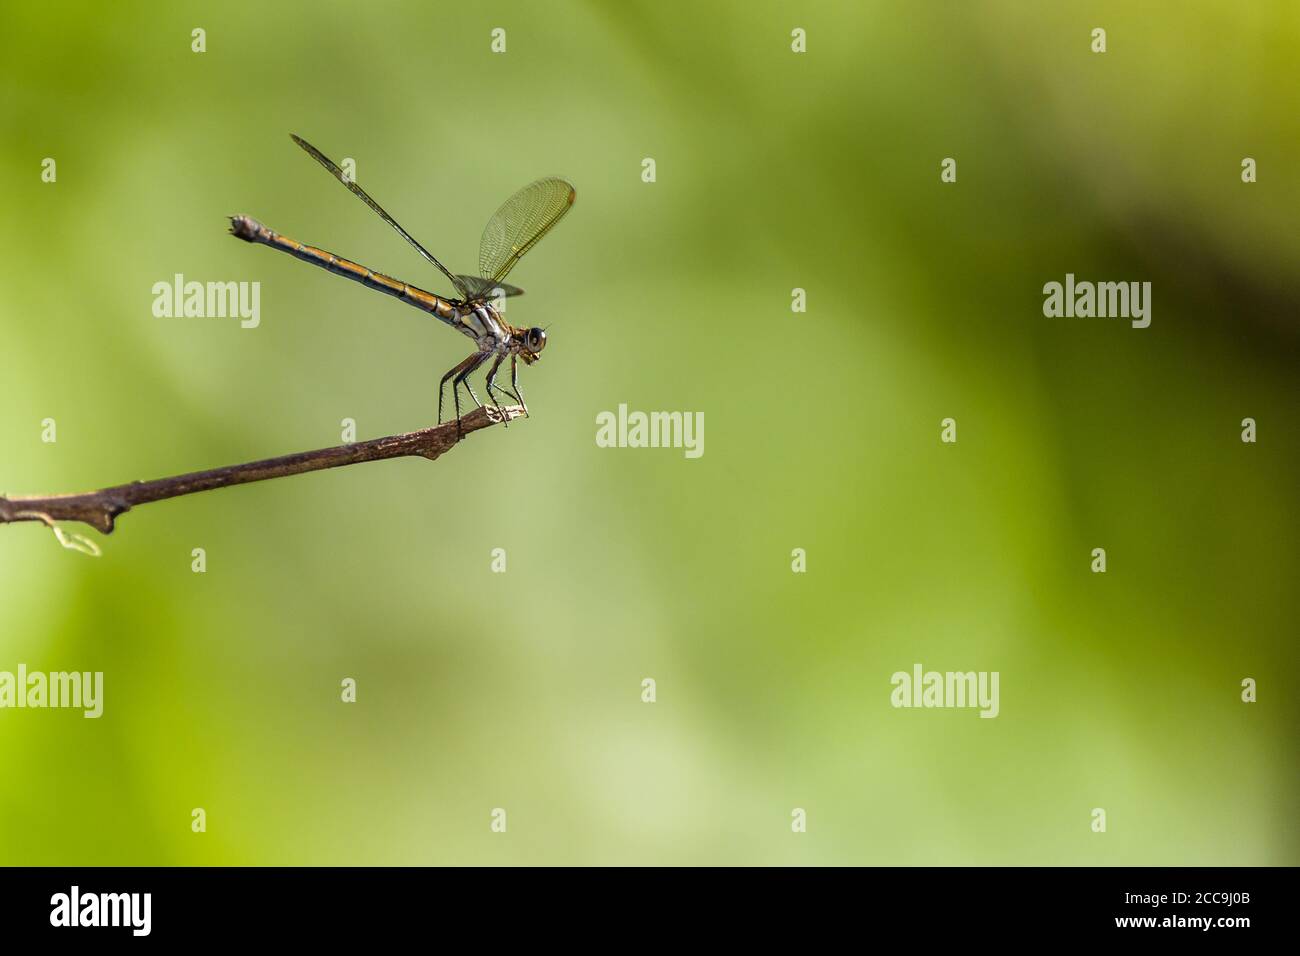 A close-up, side-on of an Australian dragonfly, between hunting forays, resting on a twig with an out of focus green background in Cairns, Queensland. Stock Photo